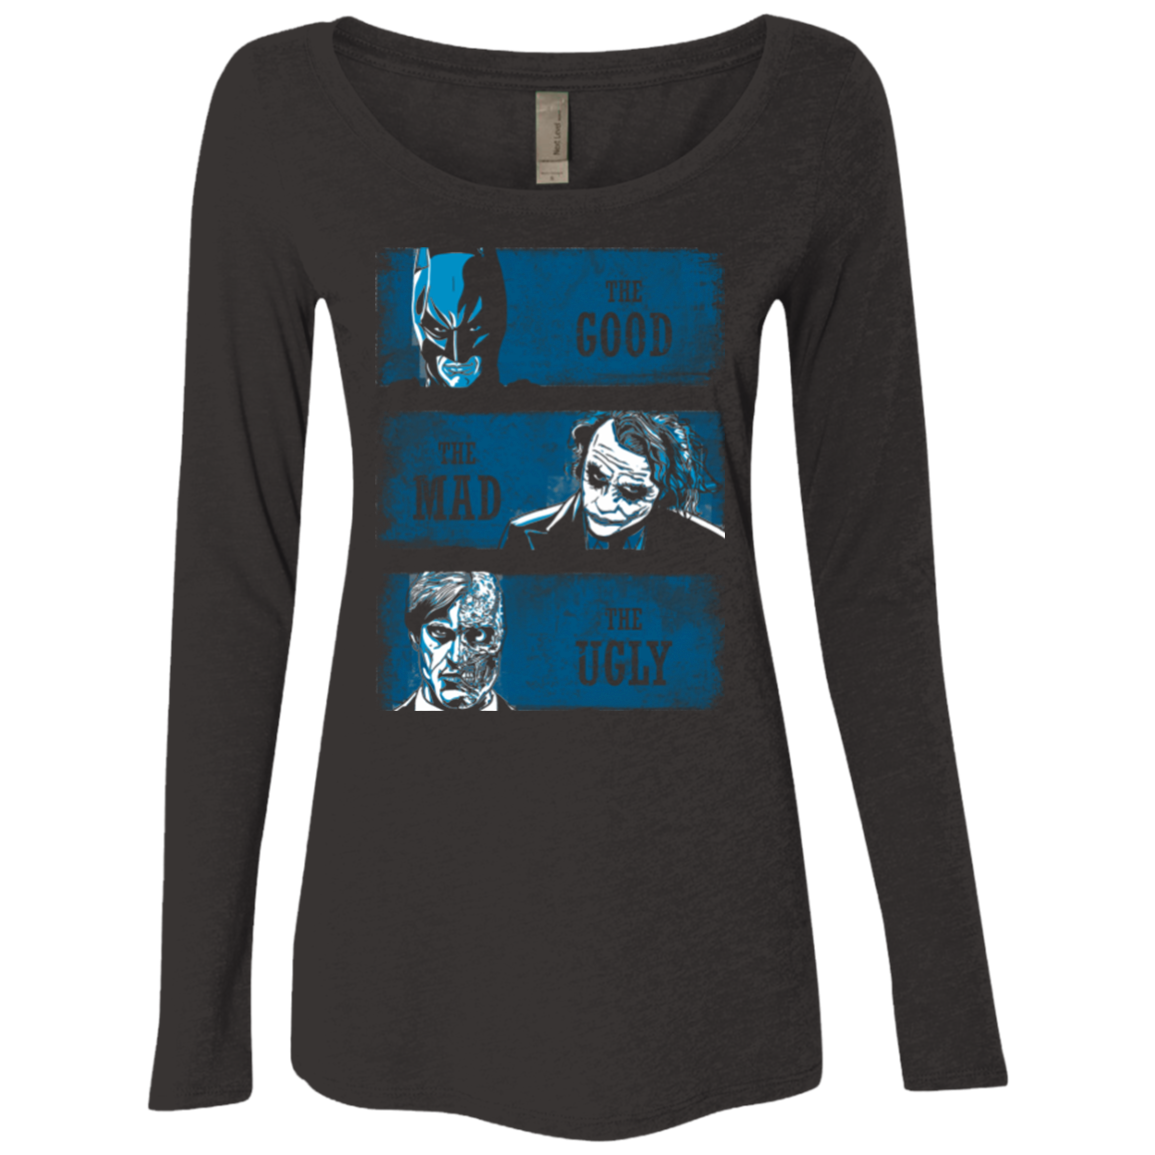 The Good the Mad and the Ugly Women's Triblend Long Sleeve Shirt